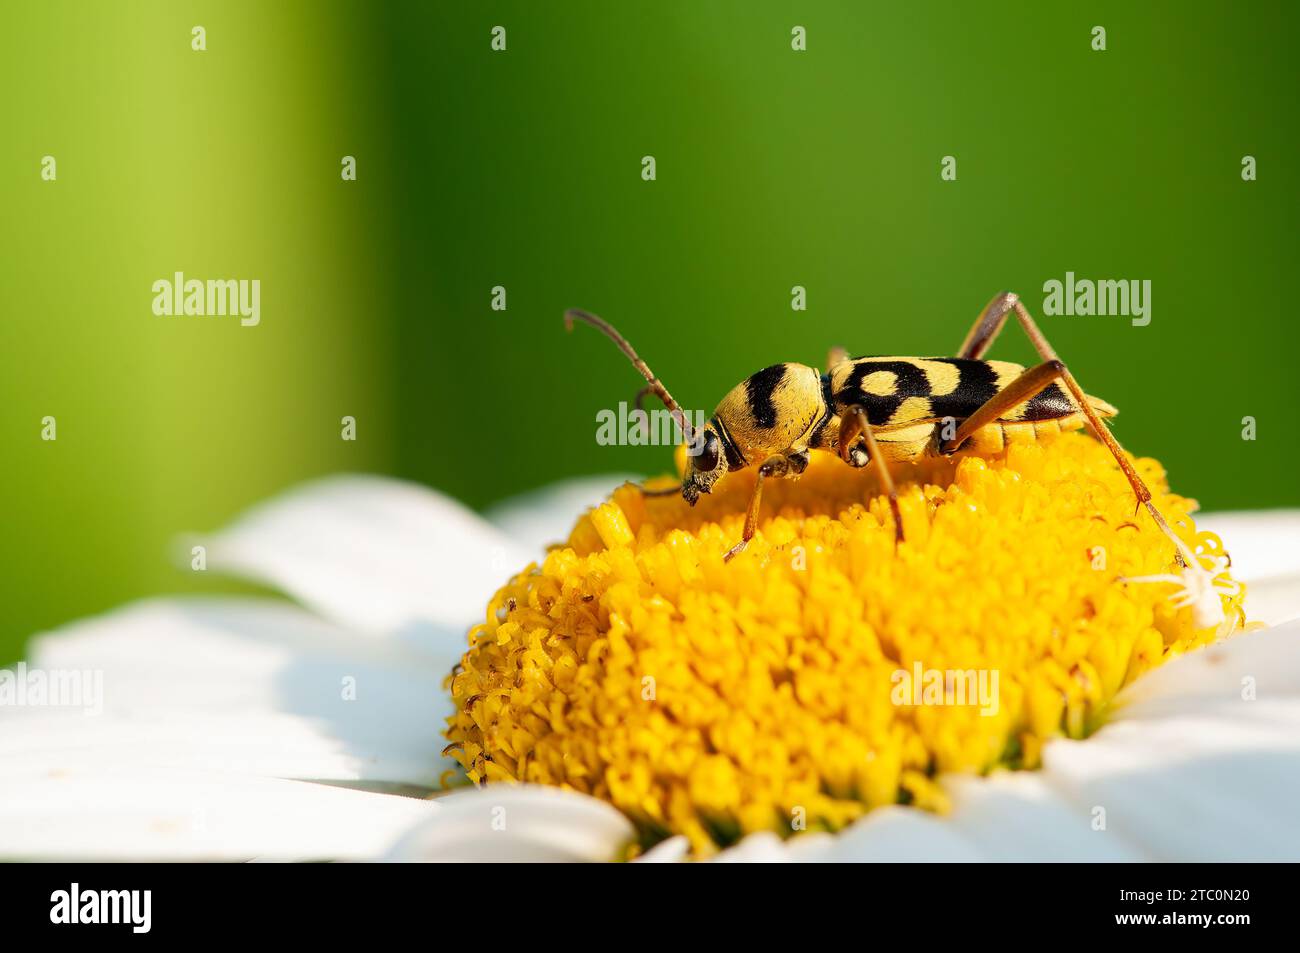 Close up of a yellow and black wasp. Stock Photo